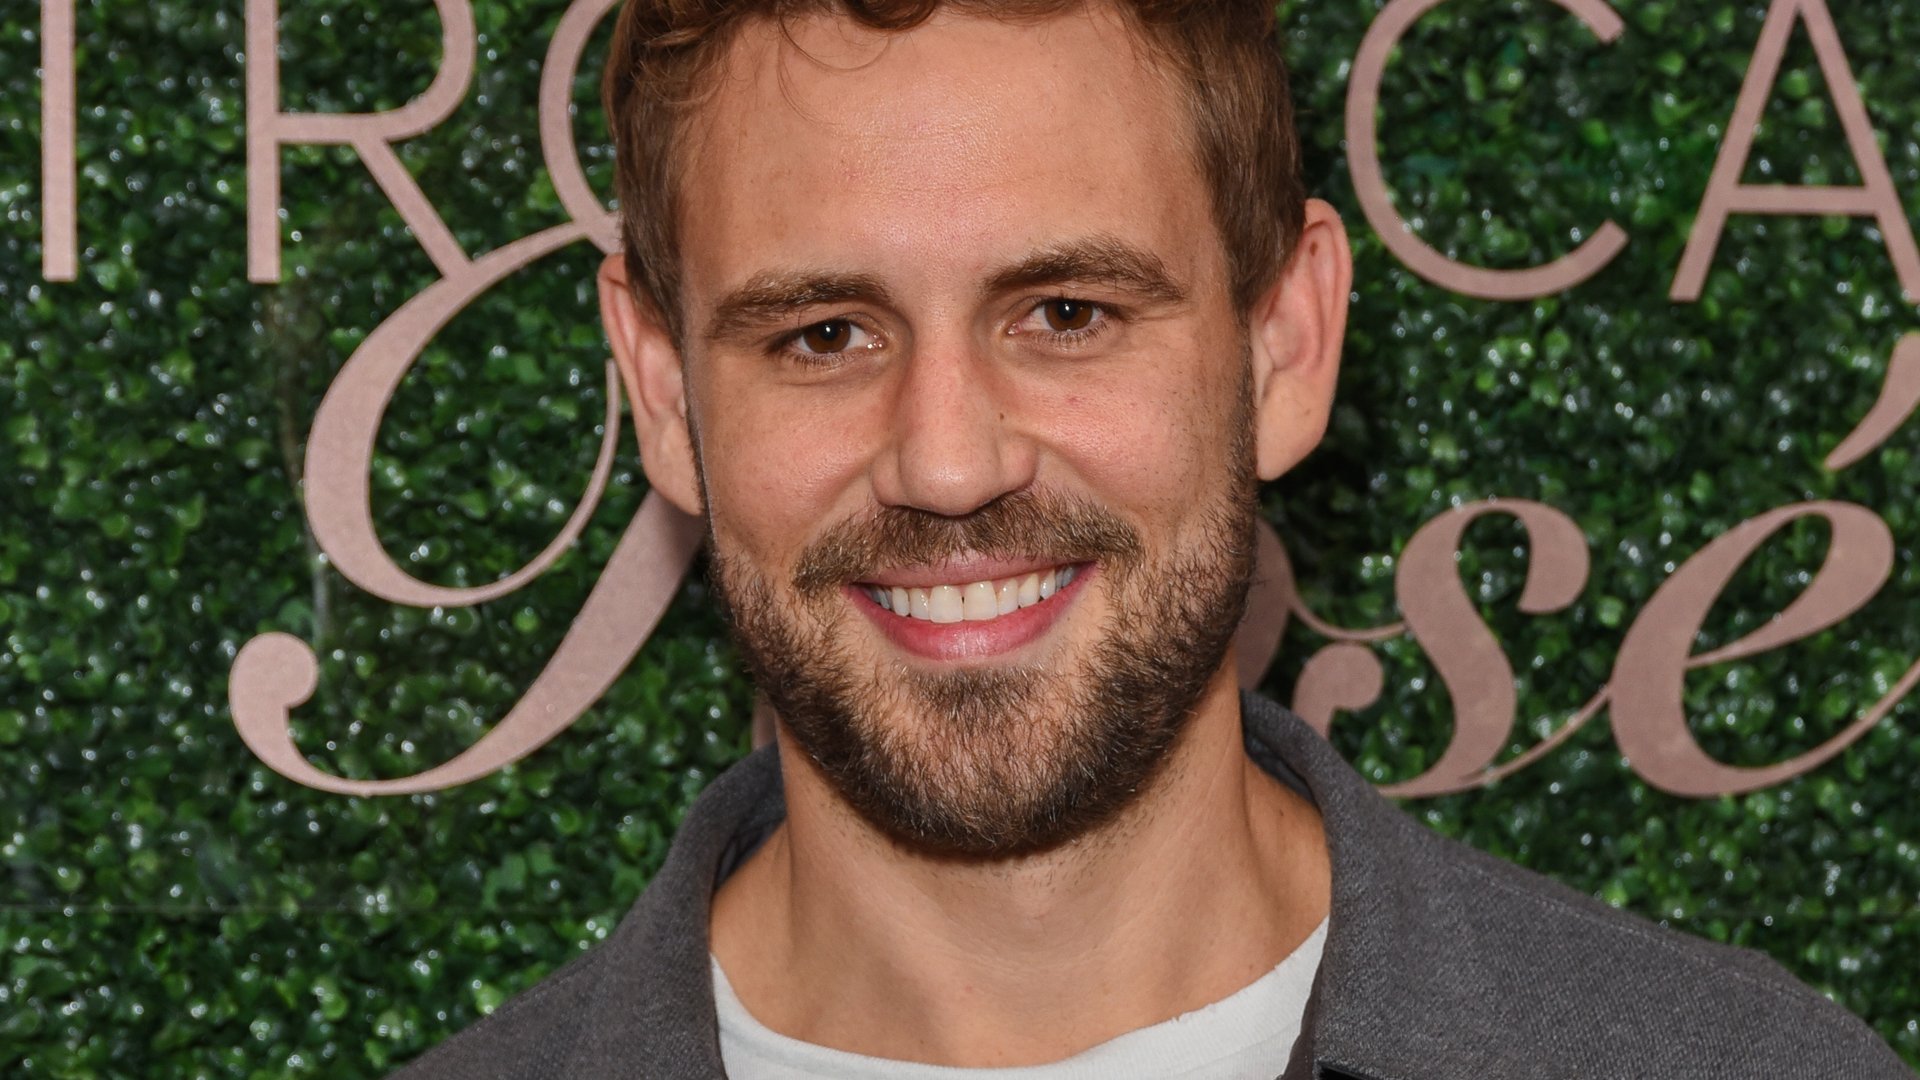 'The Bachelor' Season 21 star Nick Viall attends Chris Harrison's Seagram's Tropical Rosè launch party on March 11, 2020 in Los Angeles, California.